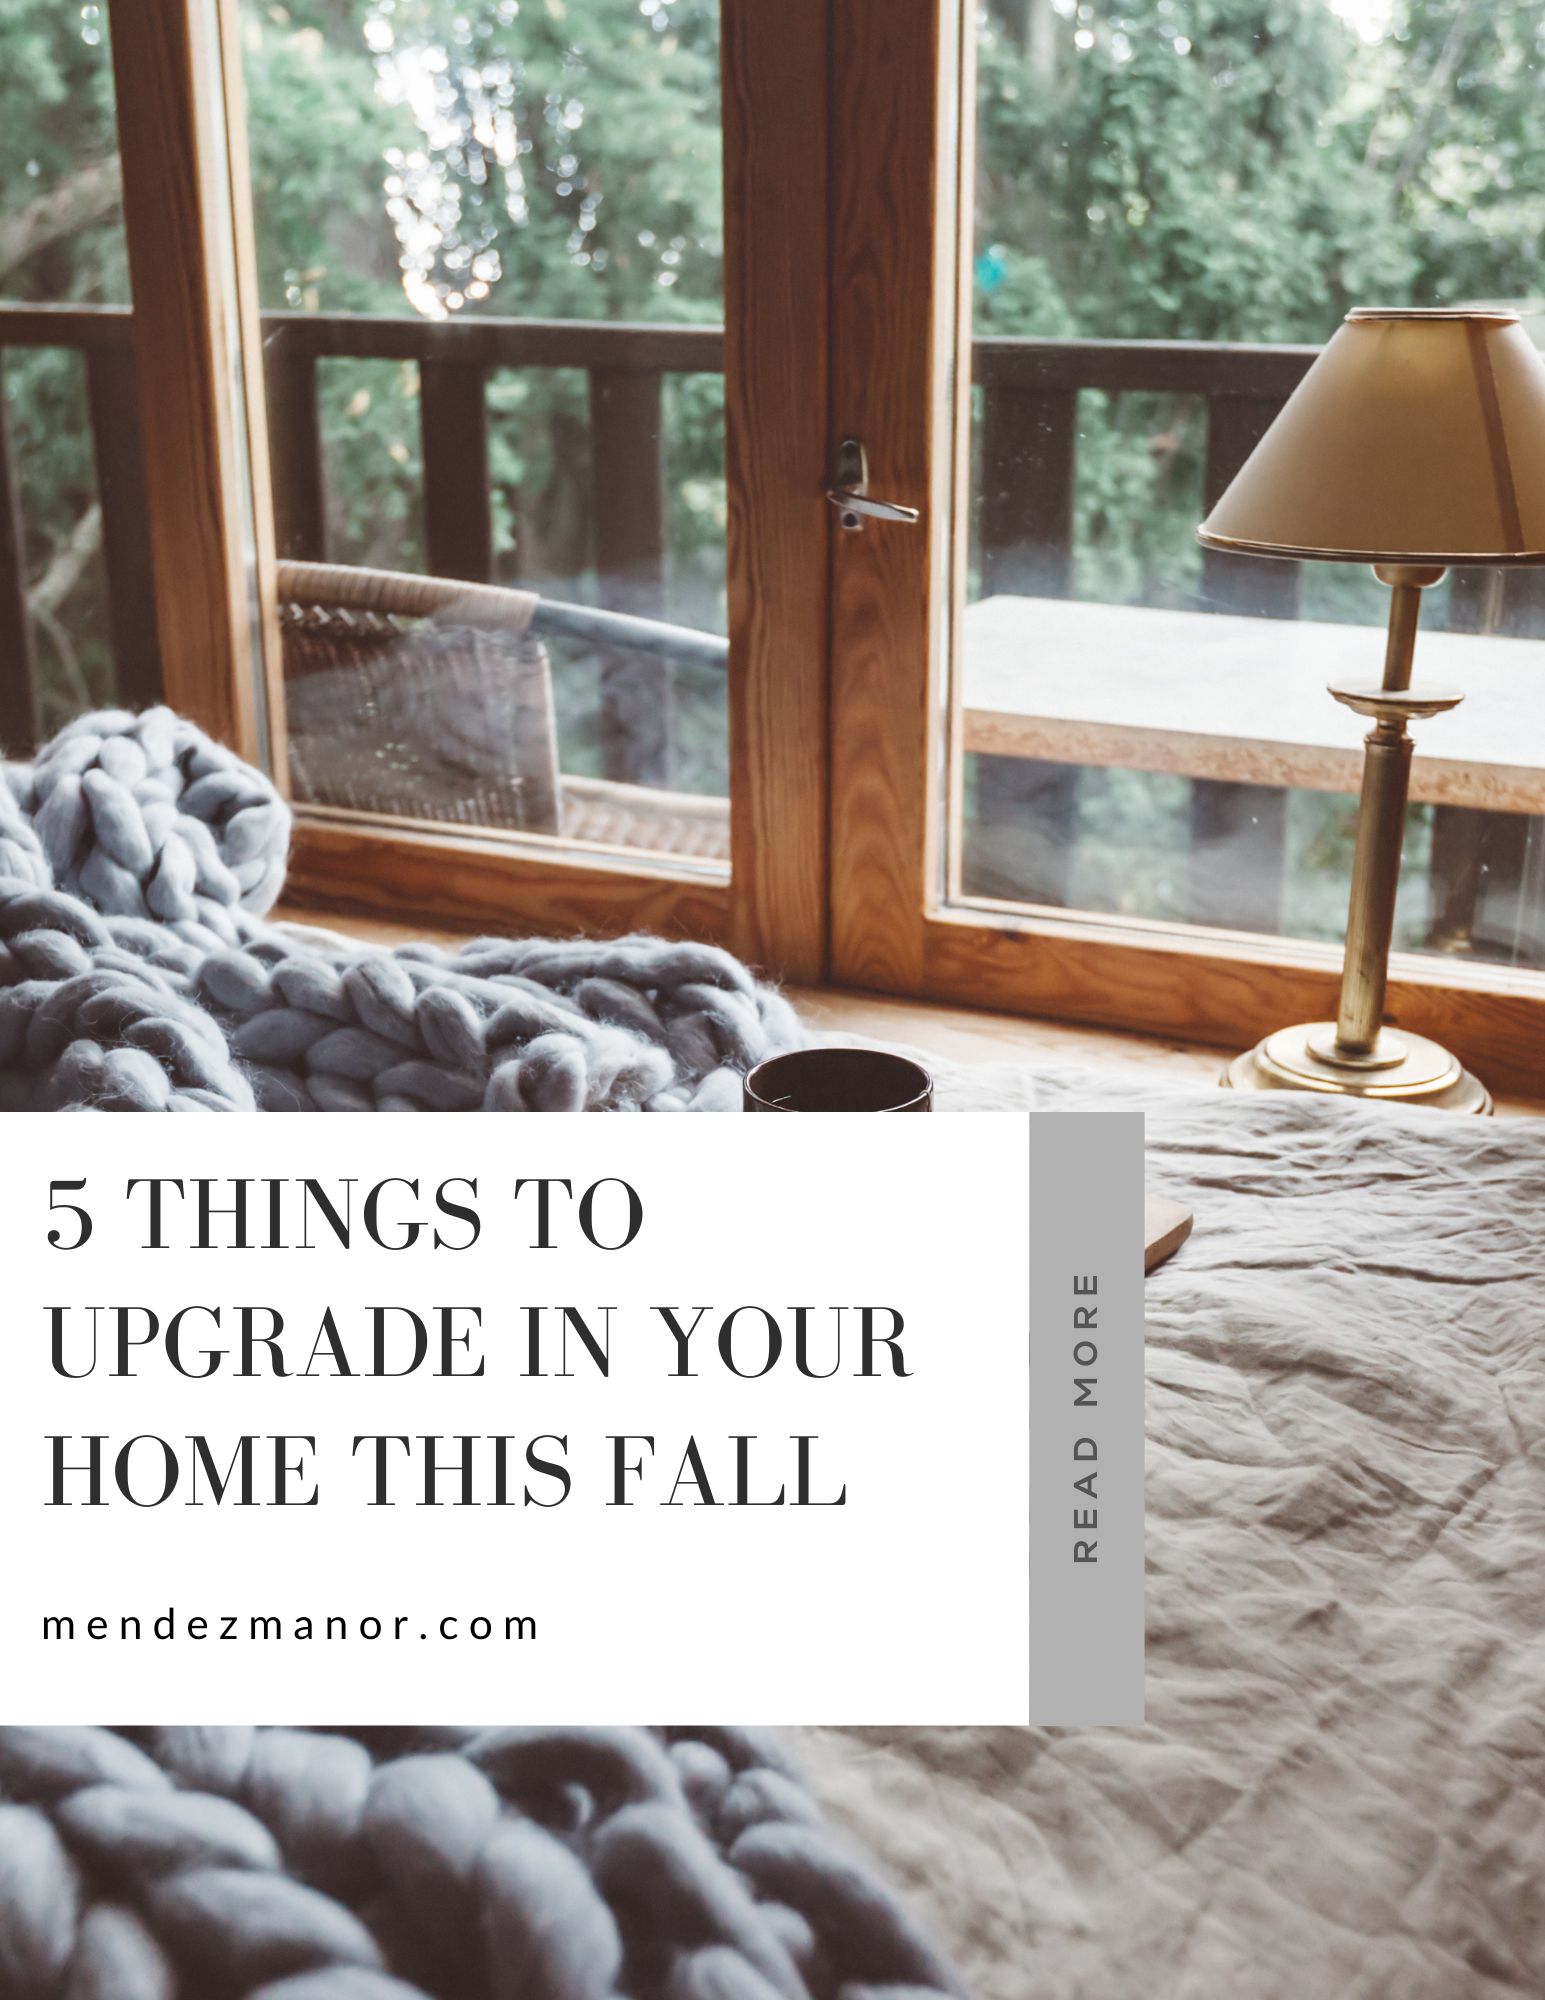 5 Things to Upgrade in Your Home This Fall